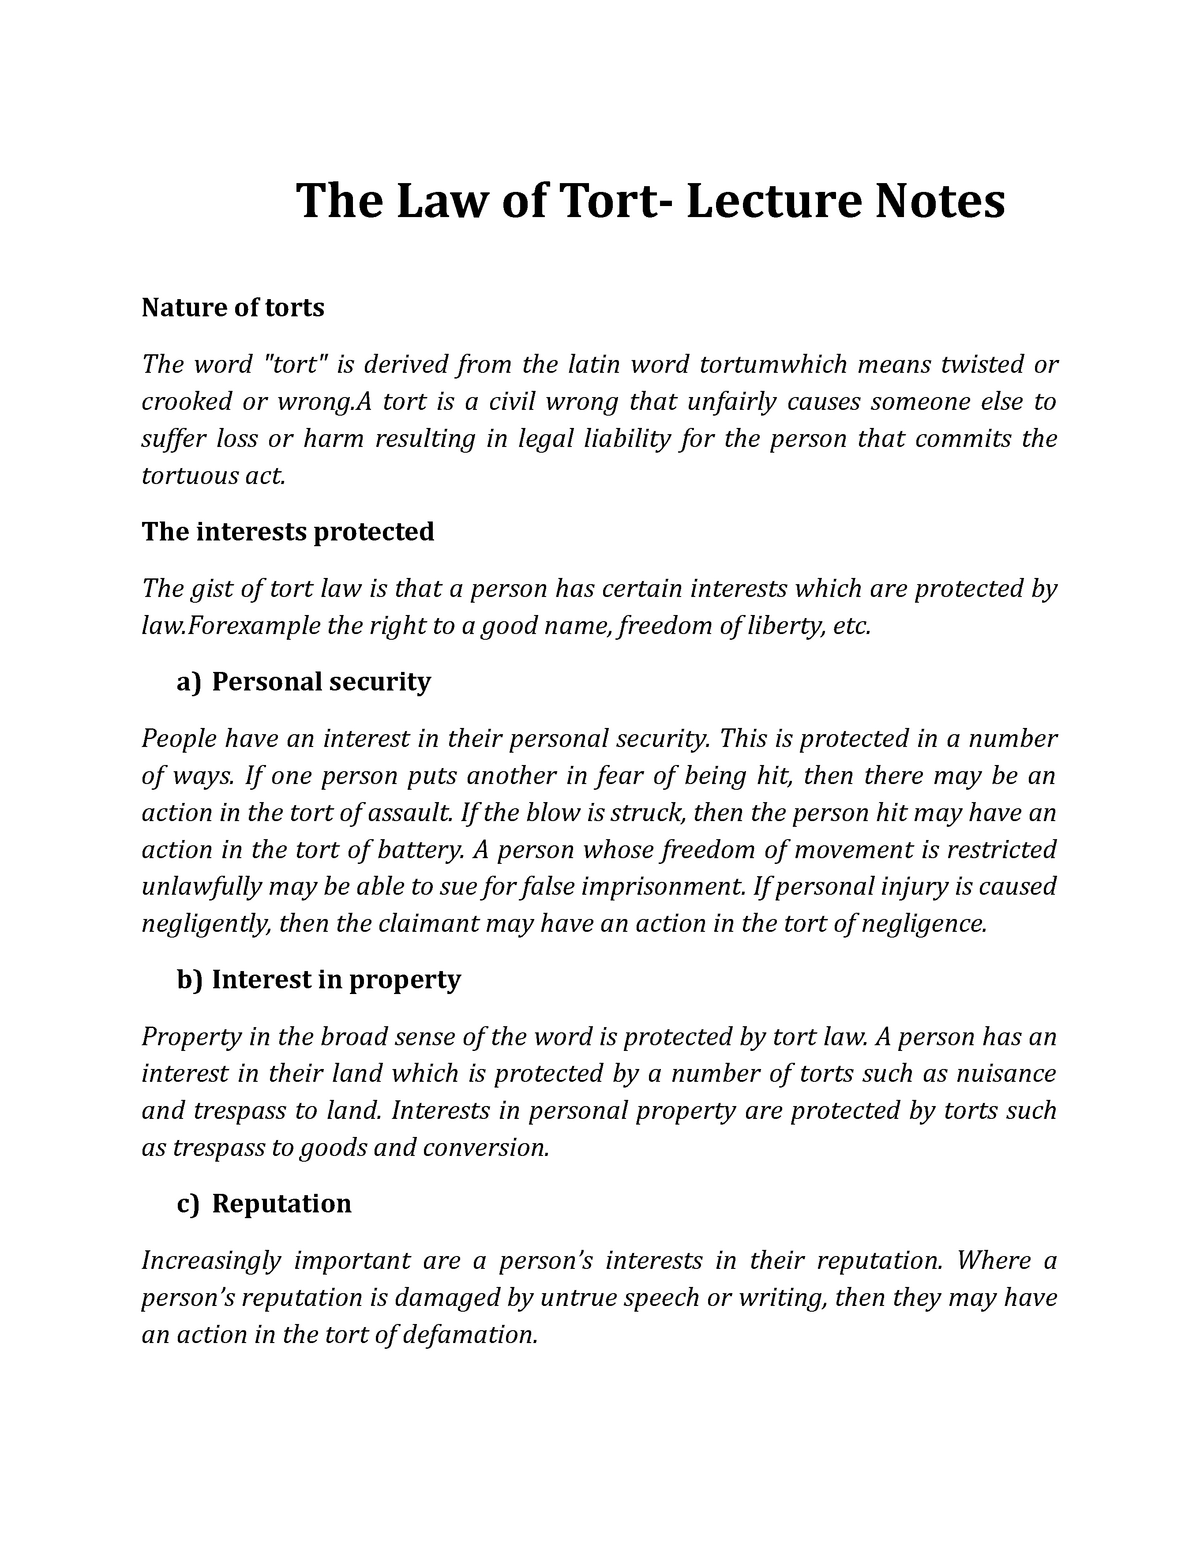 research paper topics for law of torts